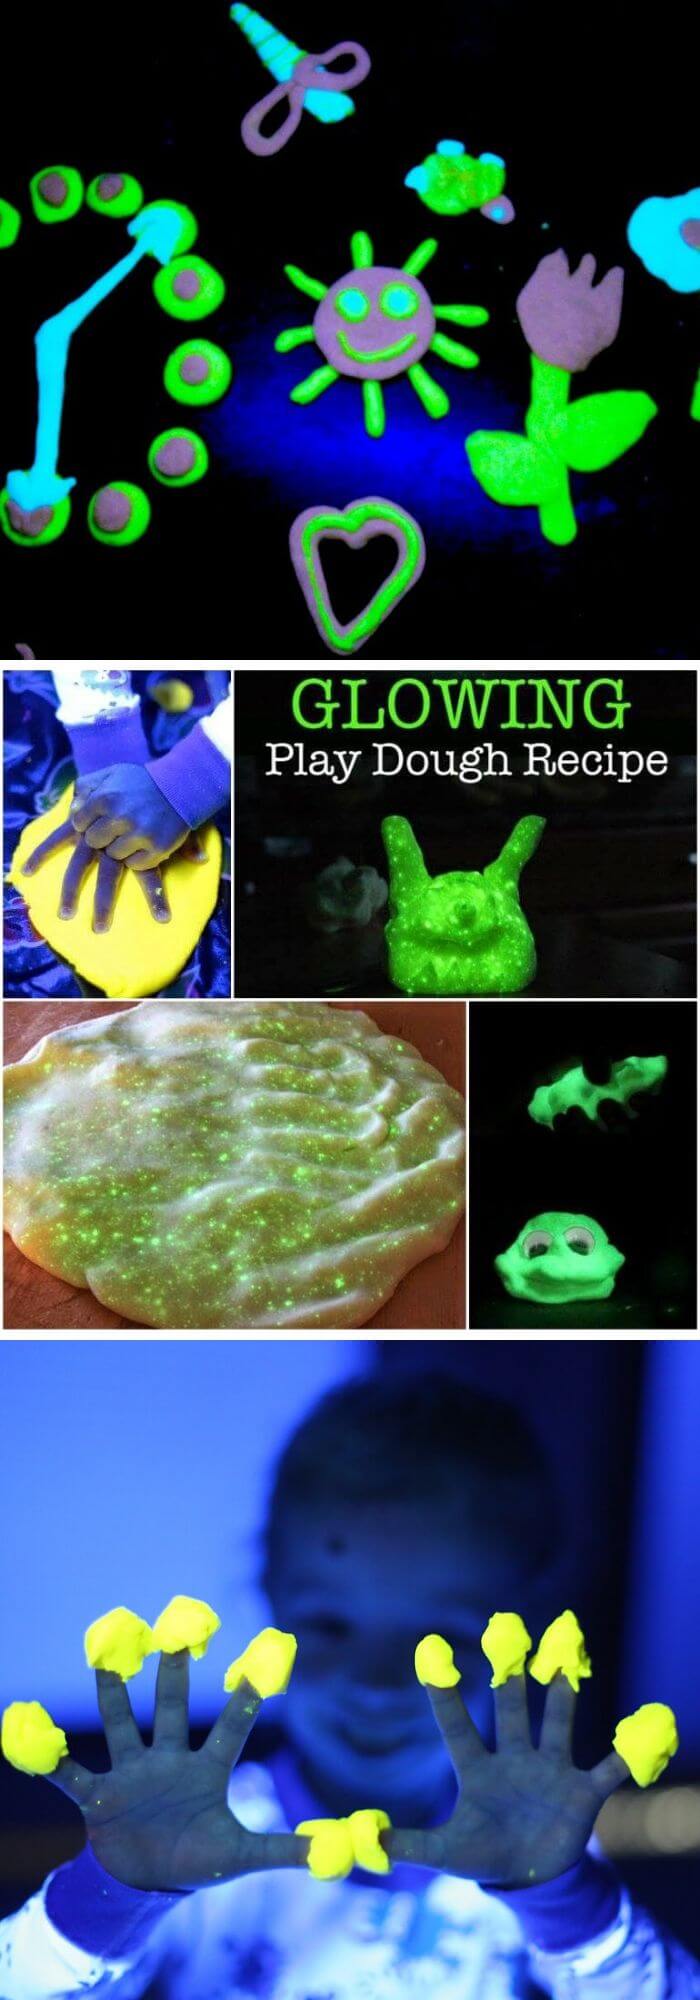 Surprise your kids with shinny playdough 